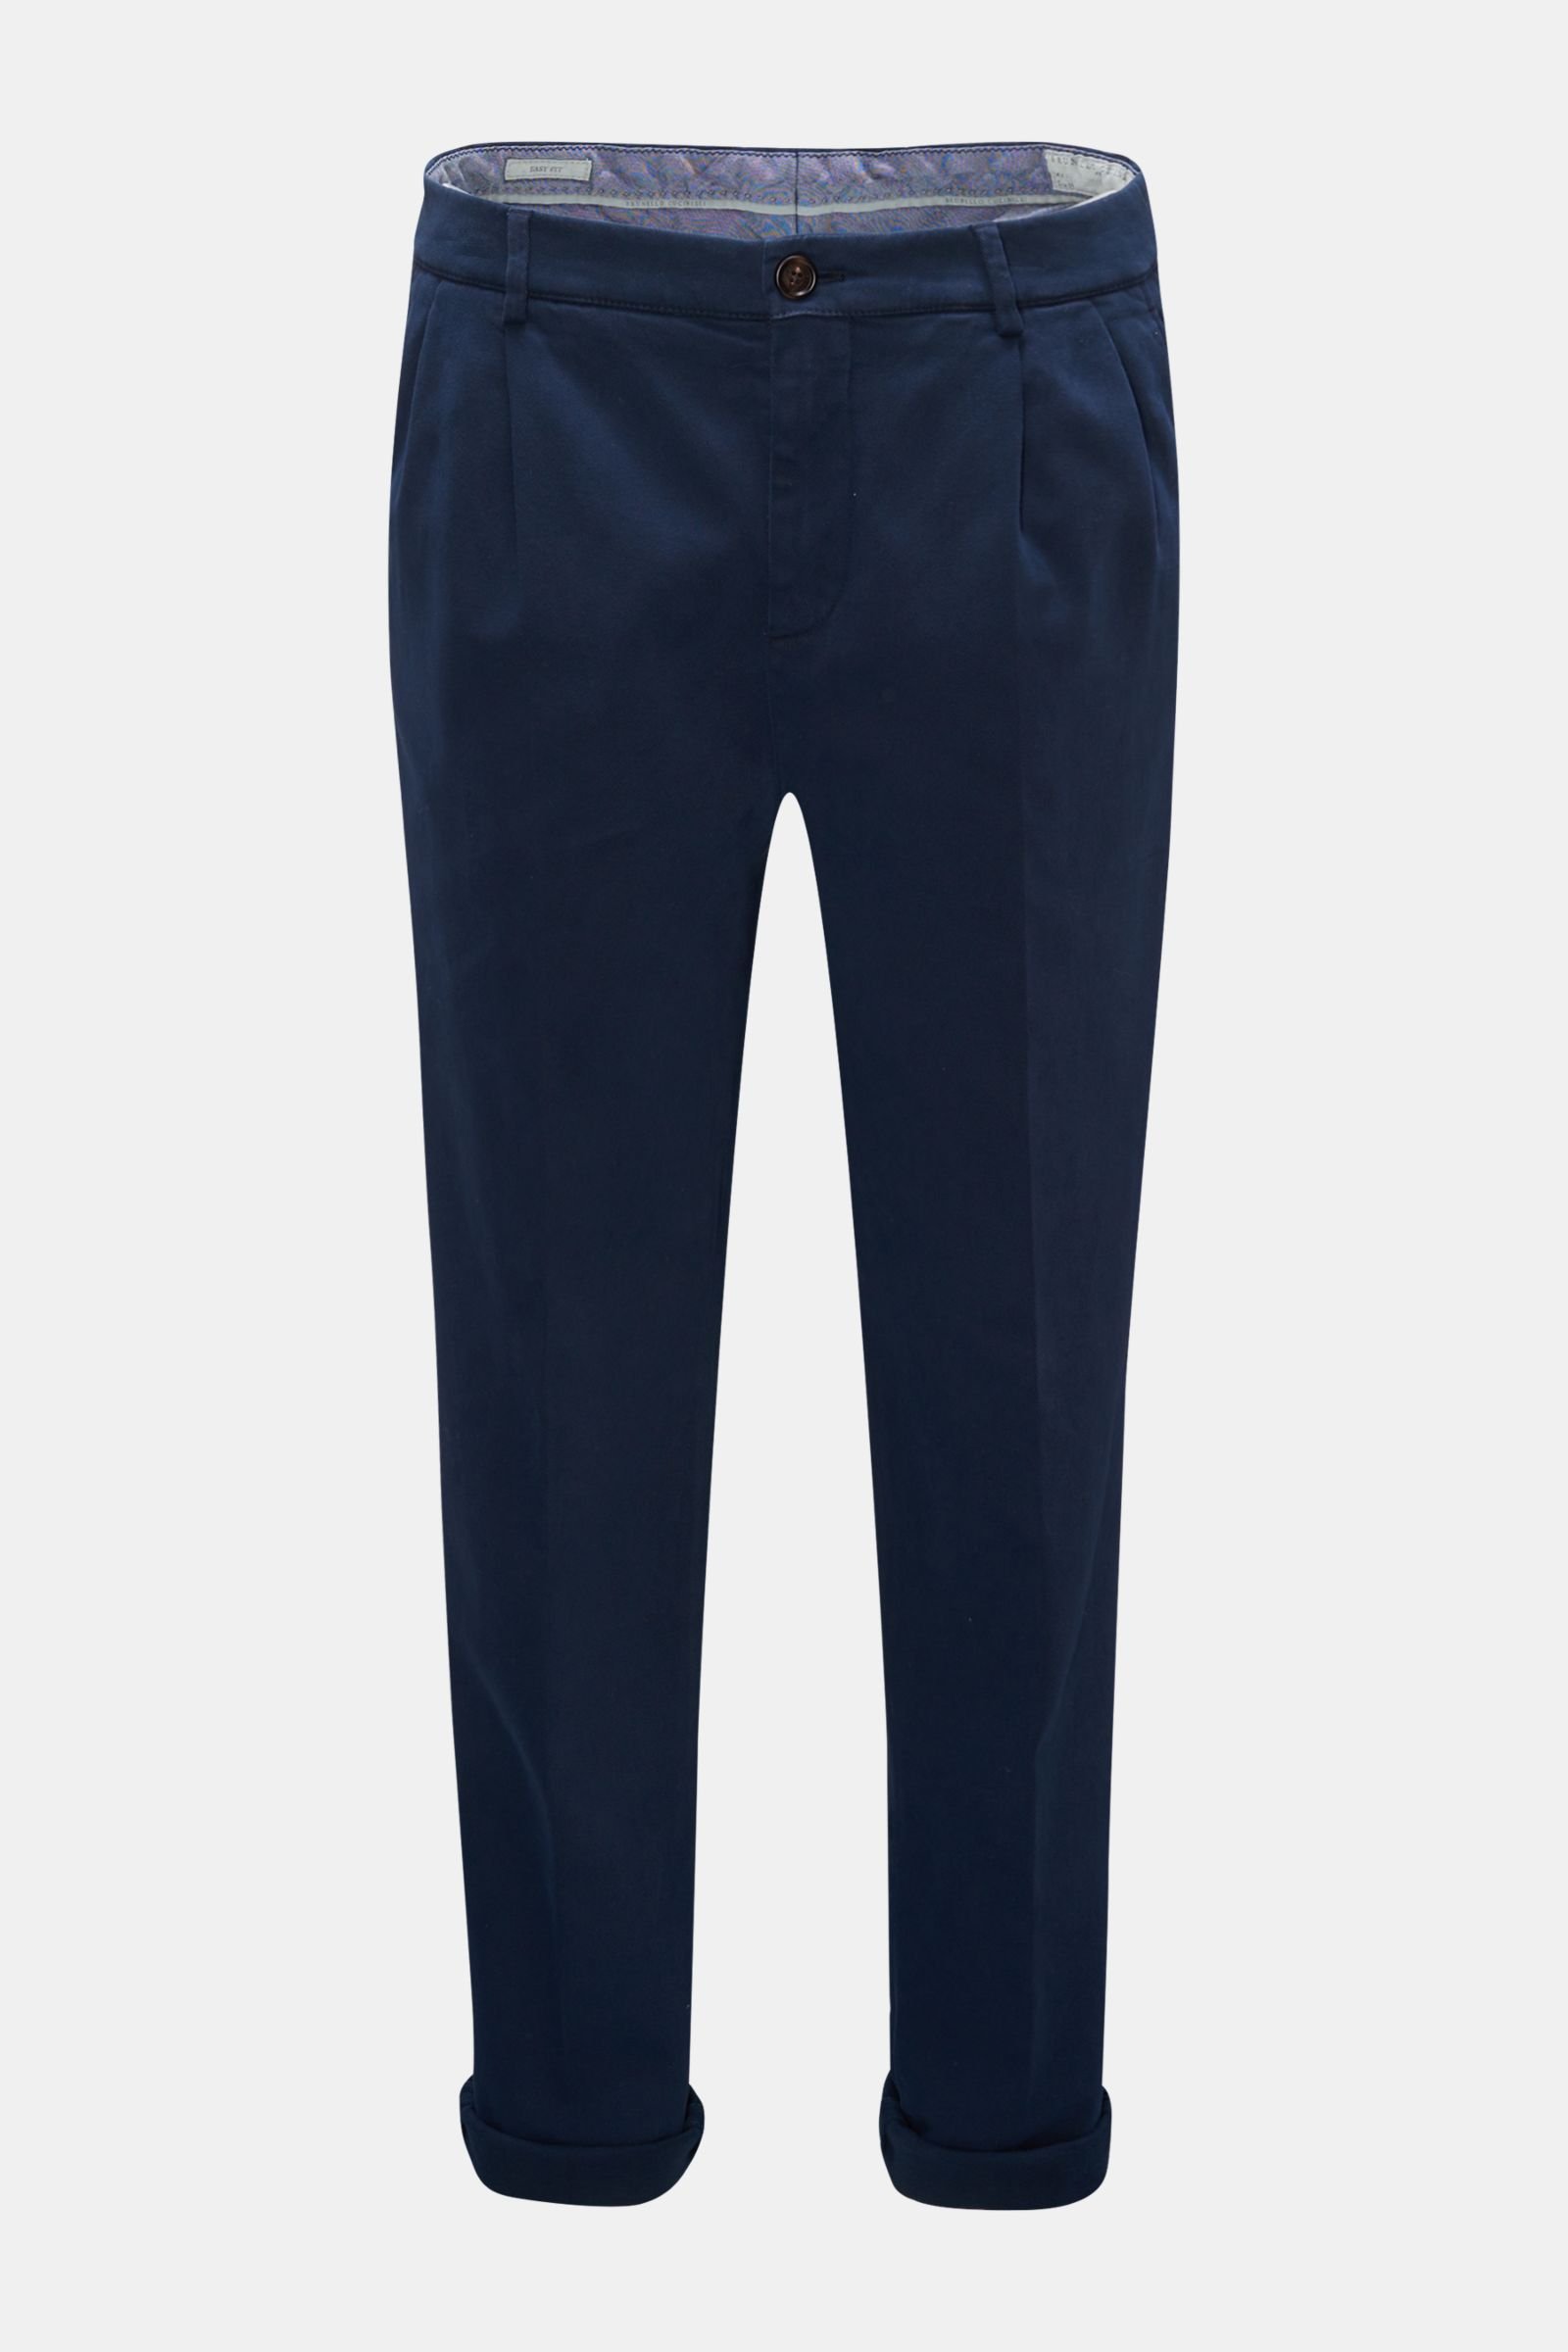 Cotton trousers 'Easy Fit' navy